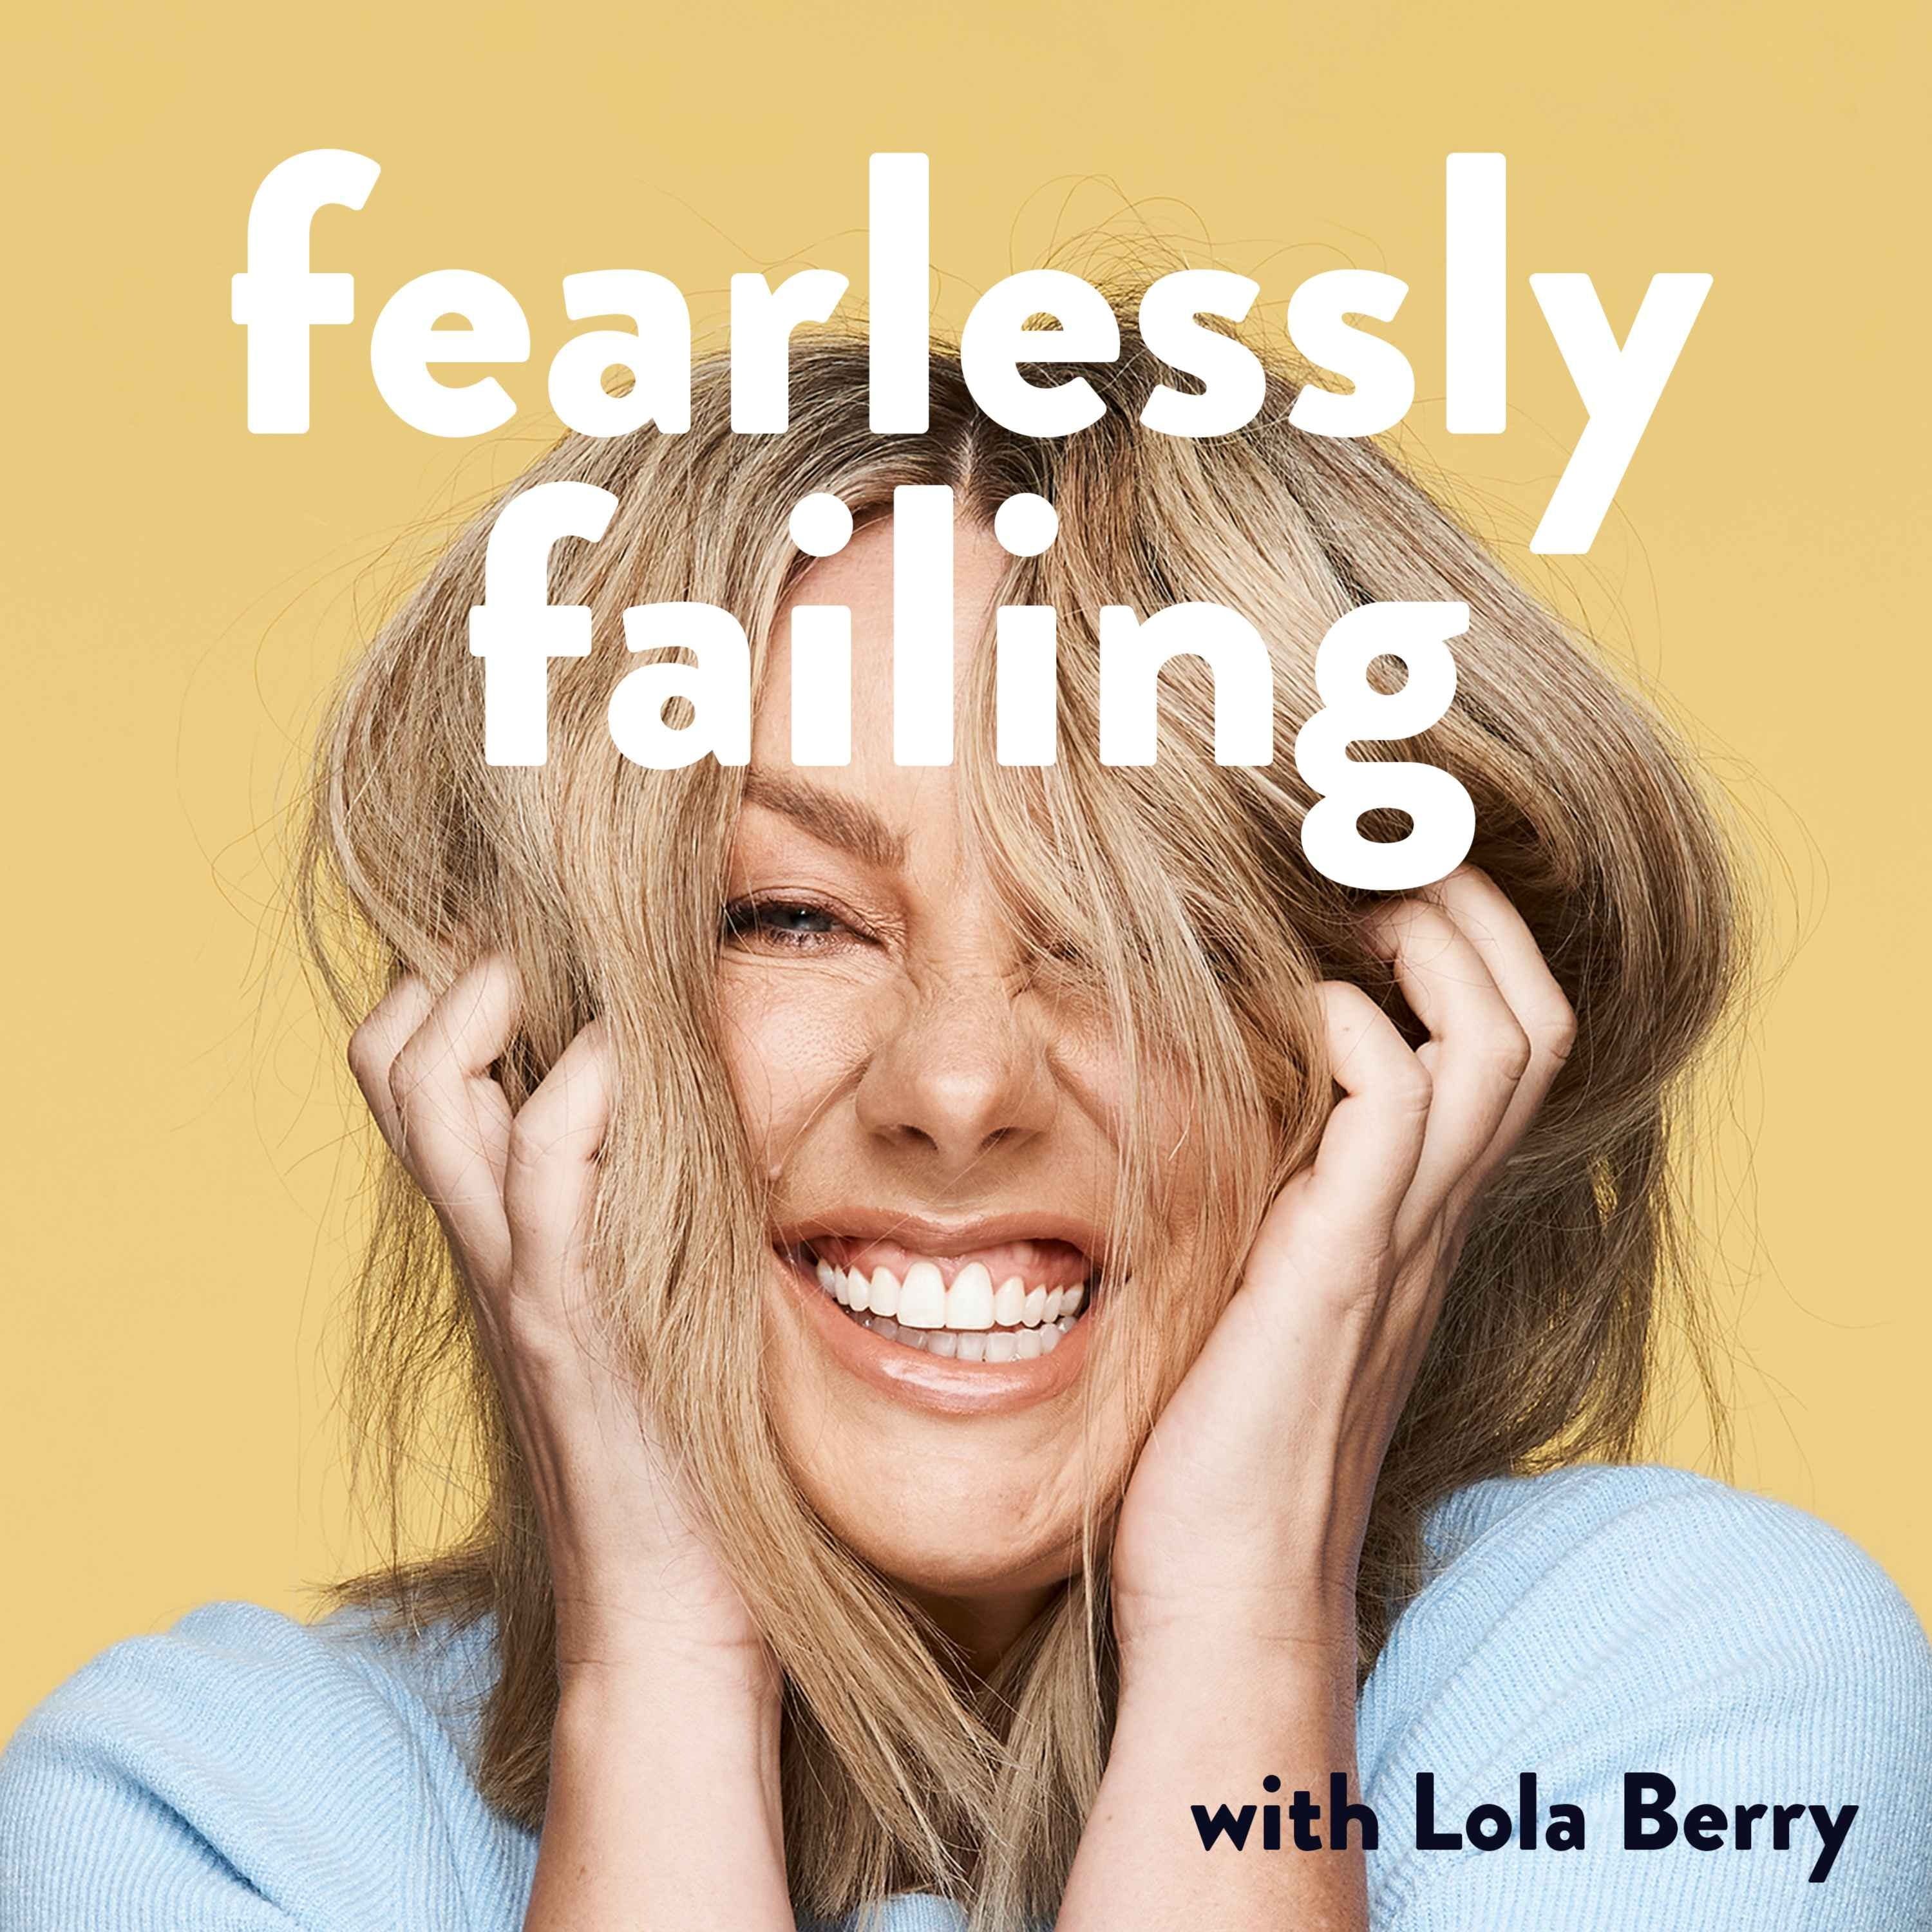 539. Fearlessly Failing: Winning the Room with Jonathan Pease